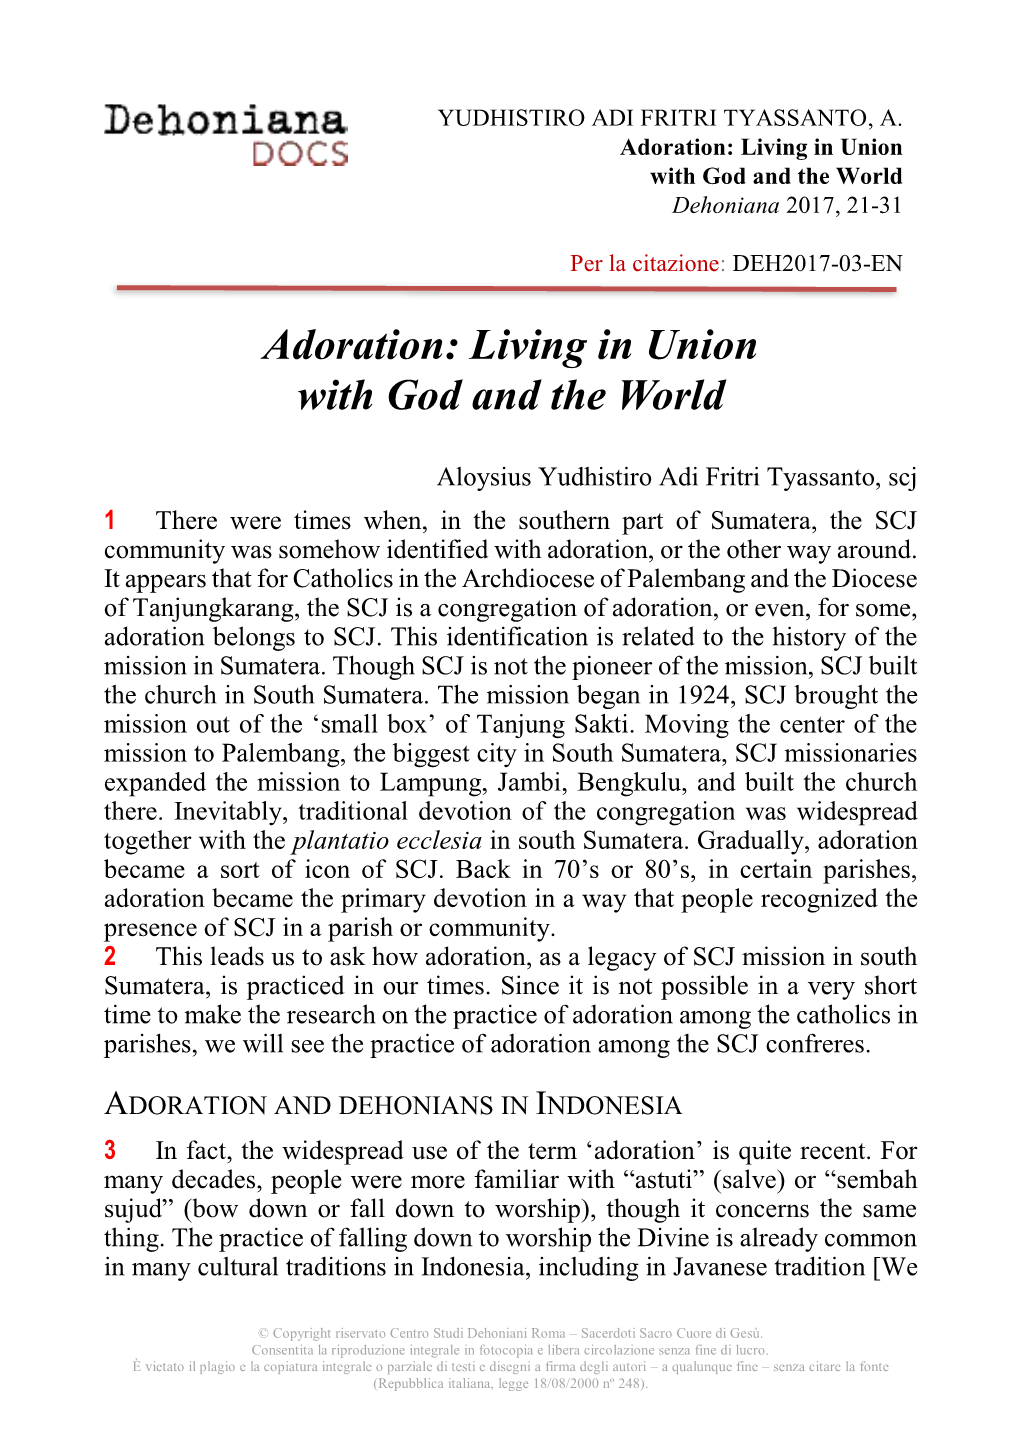 Adoration: Living in Union with God and the World Dehoniana 2017, 21-31